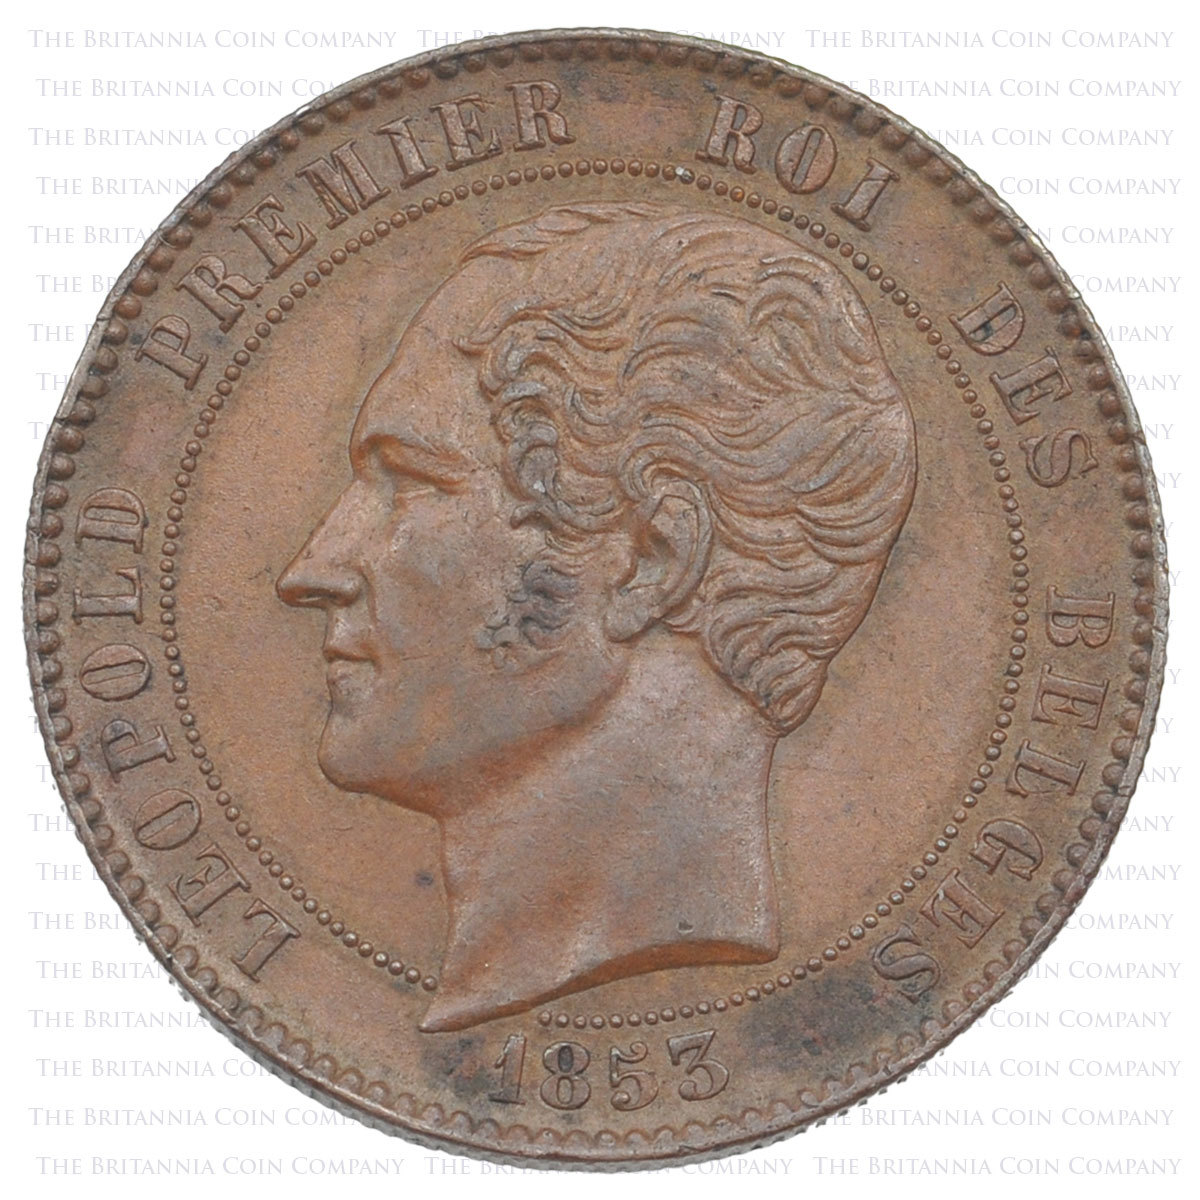 1853 Marriage of Leopold II Bronze Medal Obverse